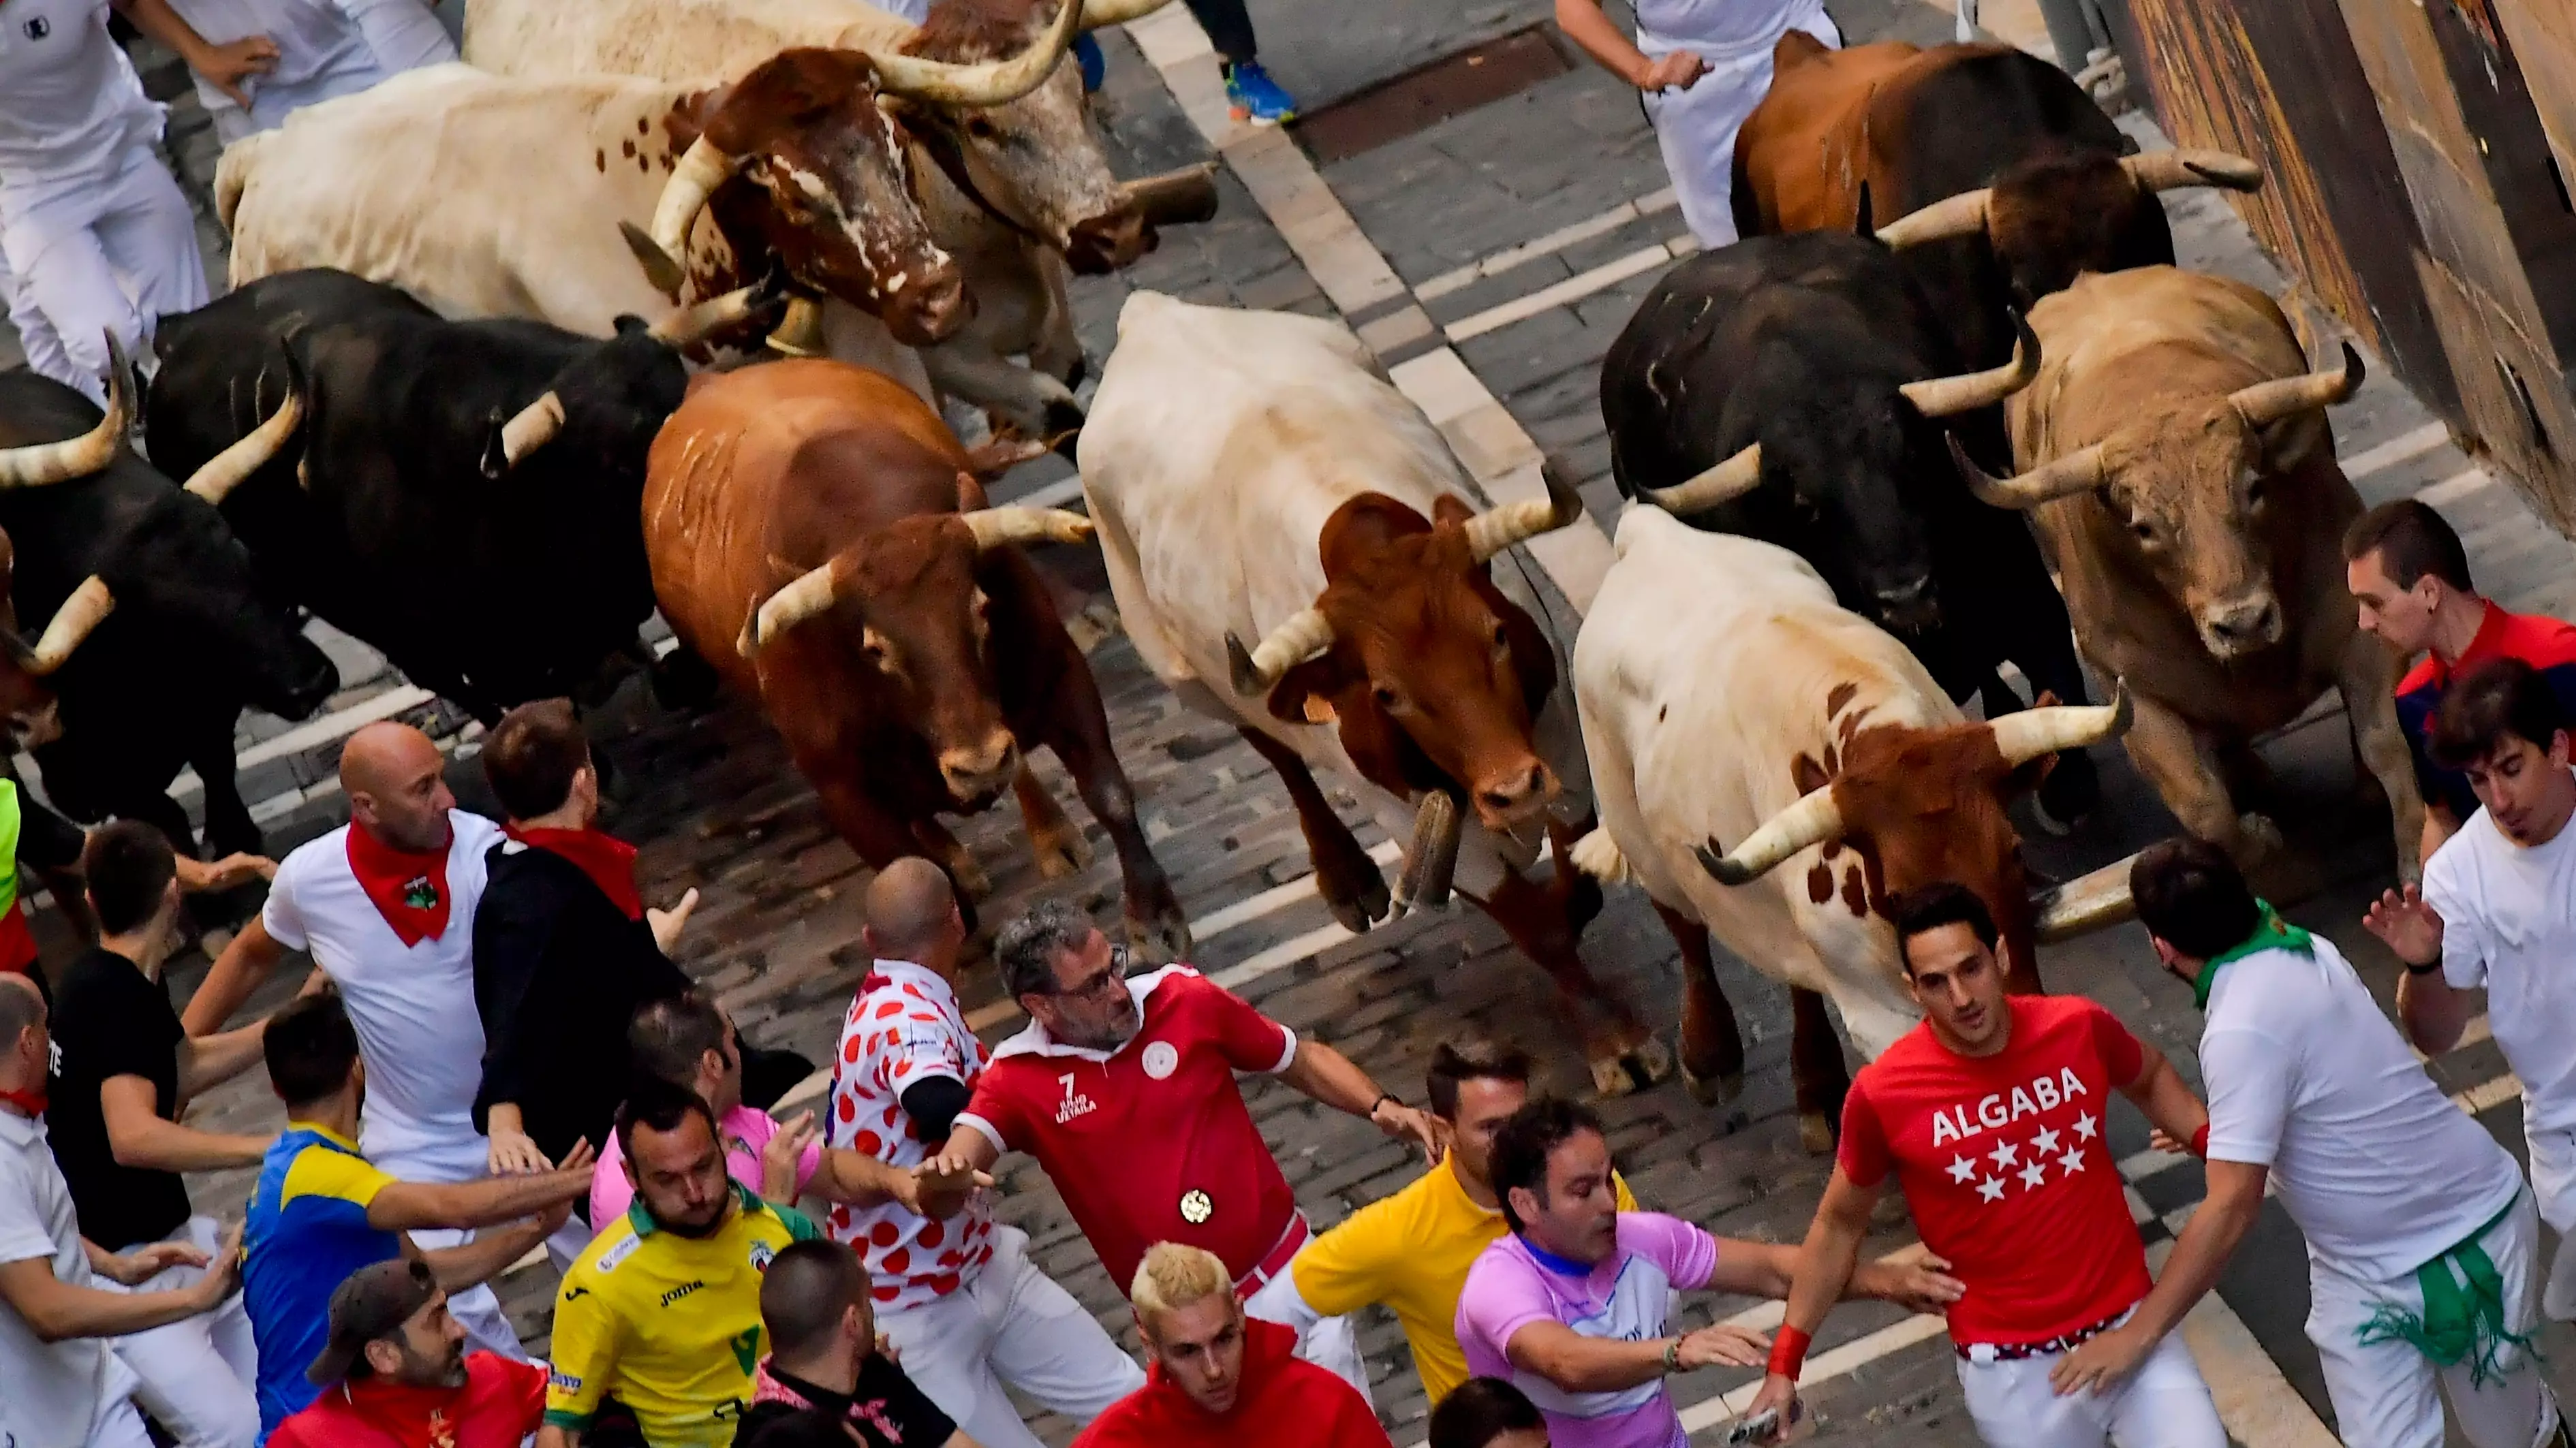 Five Taken To Hospital After Being Injured At Spanish Bull Running Event 